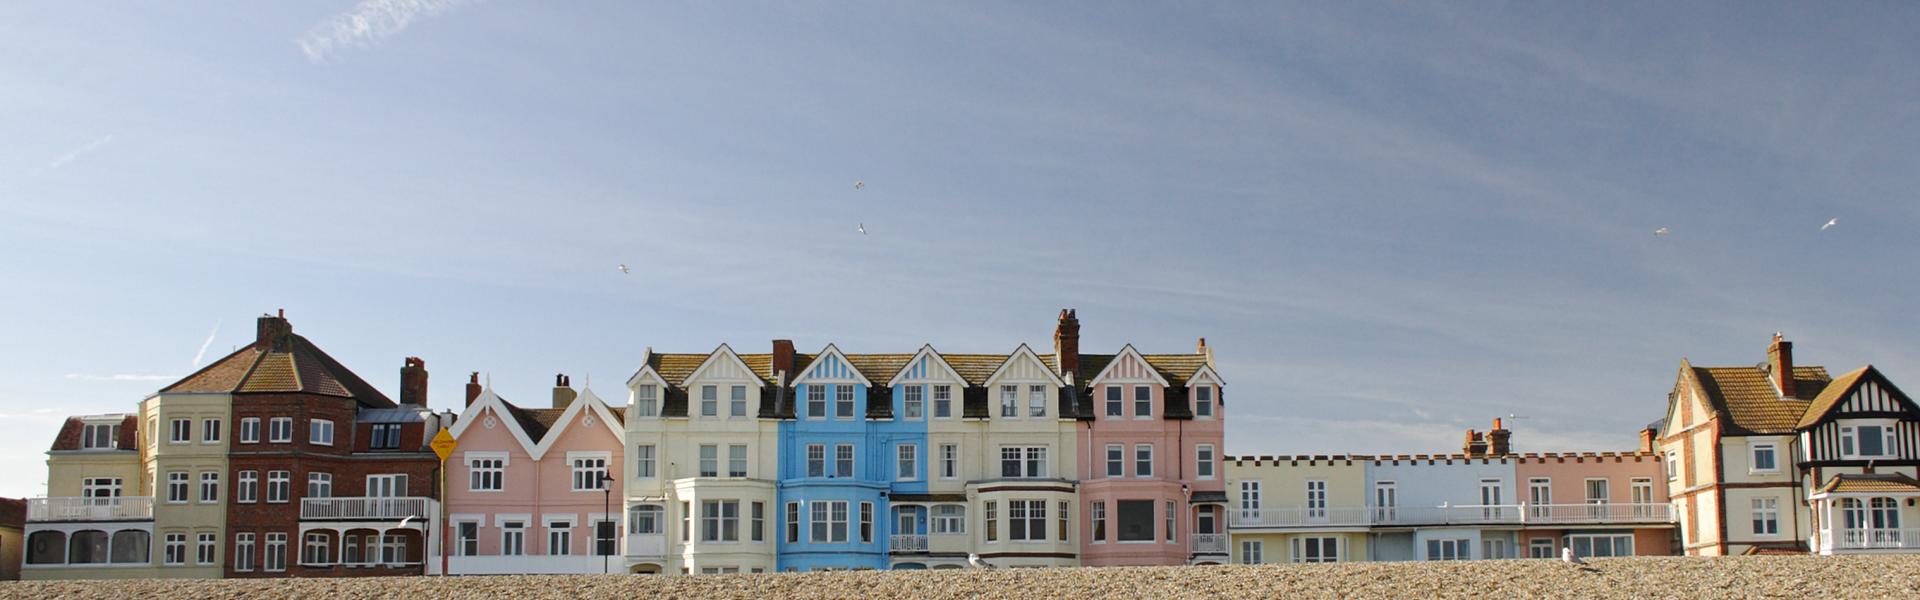 Holiday lettings & accommodation in Southwold - Wimdu